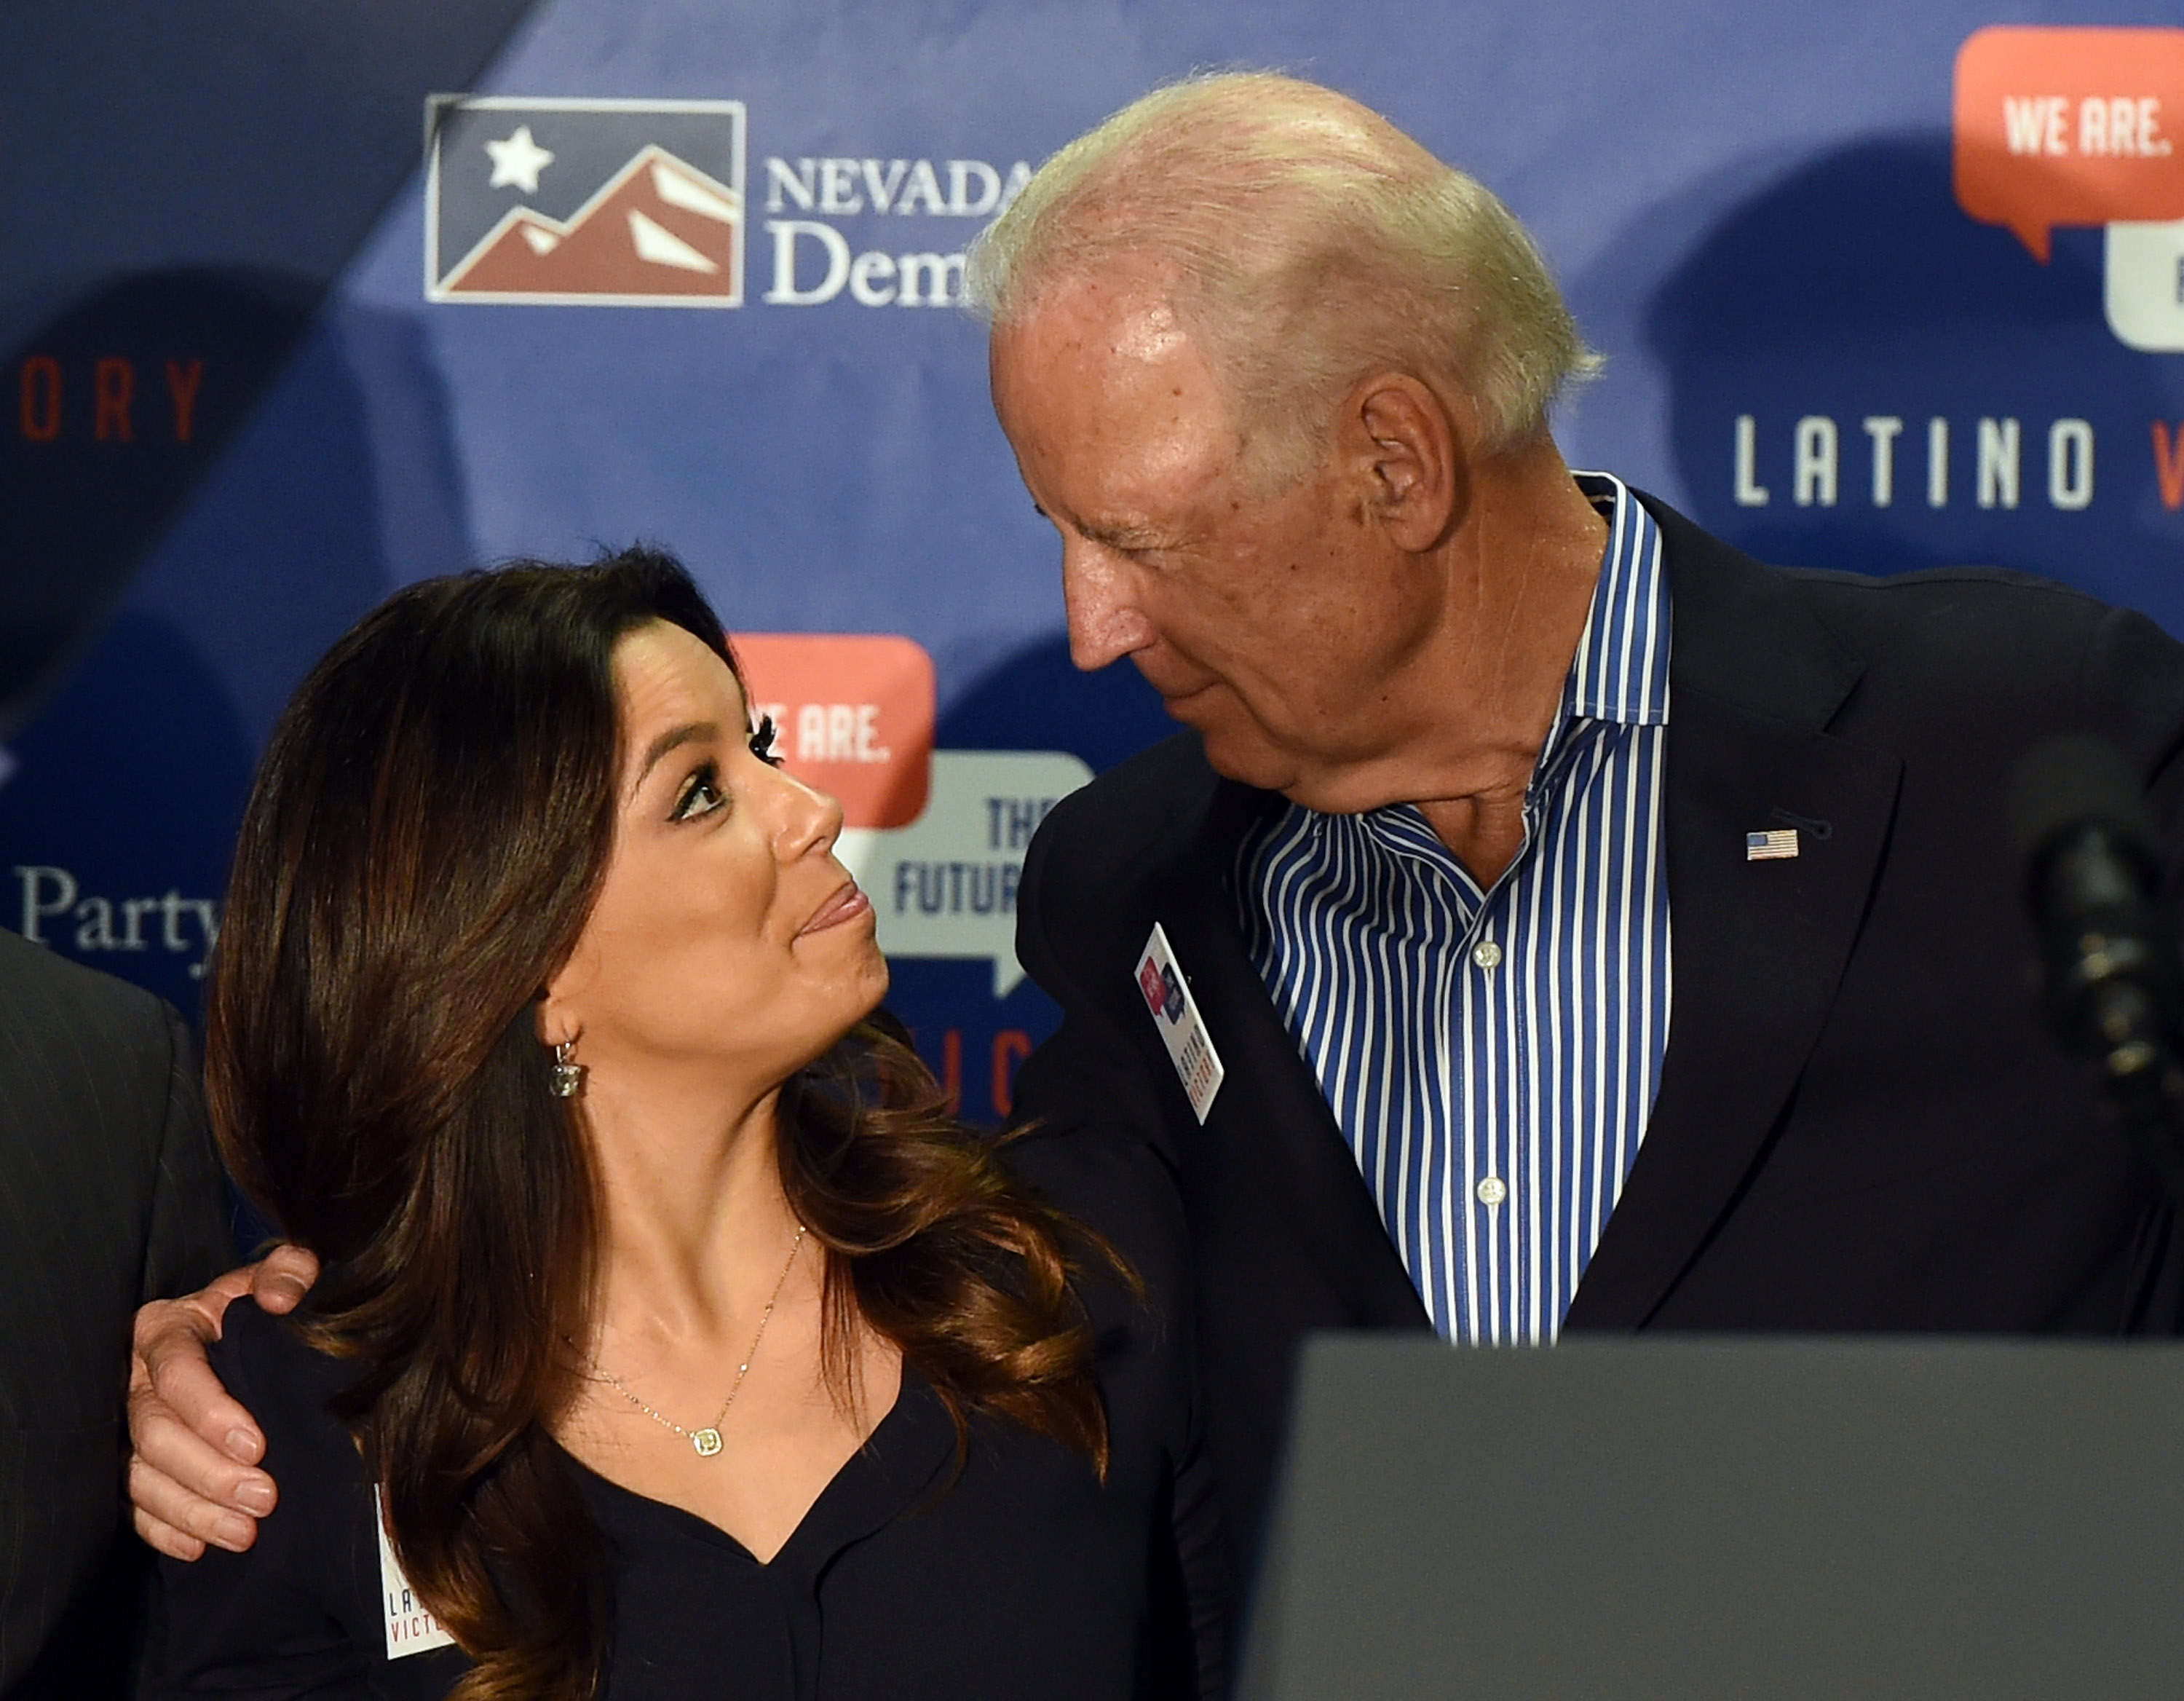 Actress Eva Longoria (L), co-founder of the Latino Victory PAC, and U.S. Vice President Joe Biden embrace after speaking at a get-out-the-vote rally at a union hall on November 1, 2014 in Las Vegas, Nevada. (Photo by Ethan Miller/Getty Images)